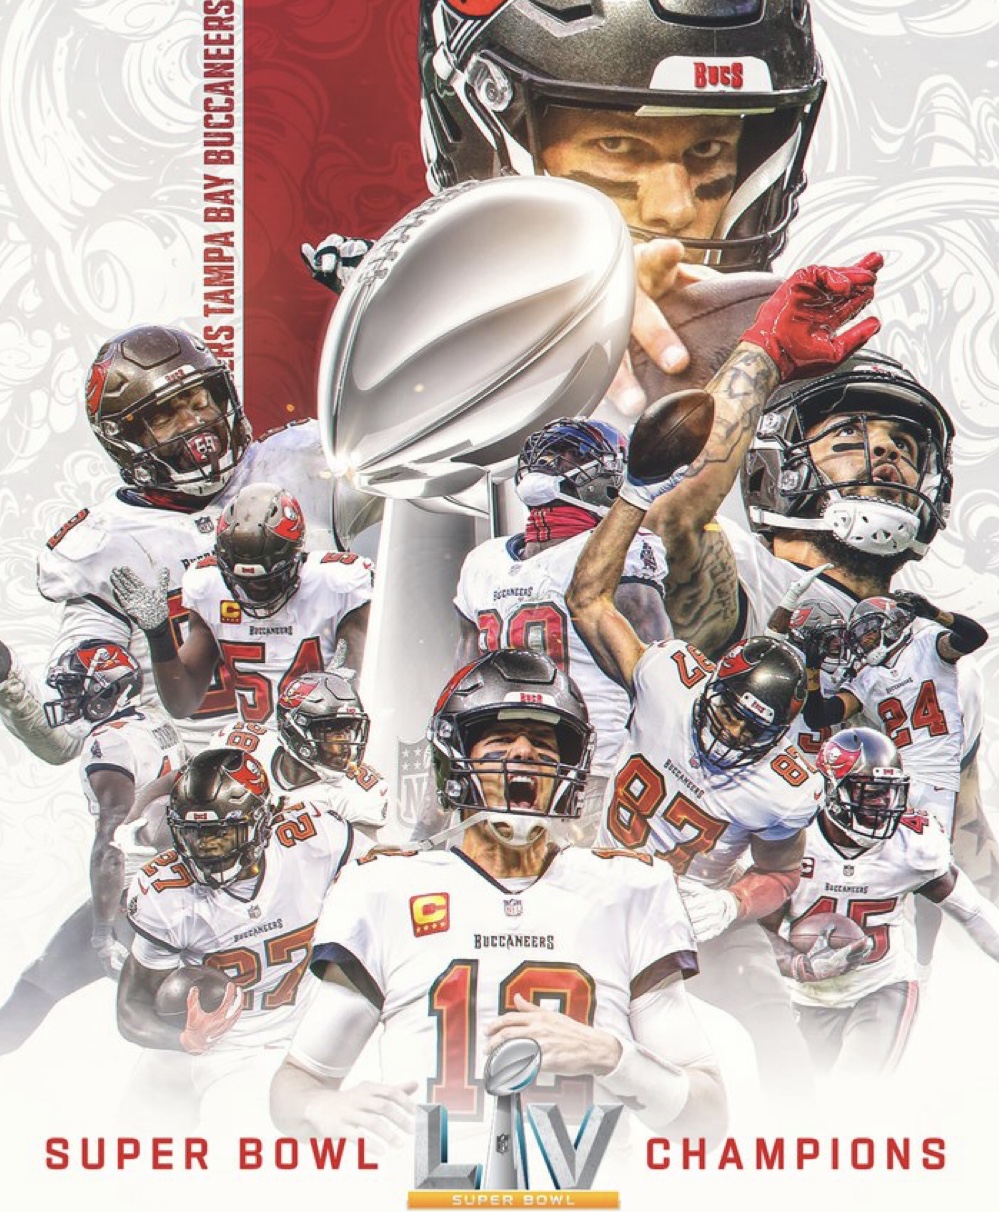 The Tampa Bay Buccaneers Defeat the Kansas City Chiefs at Super